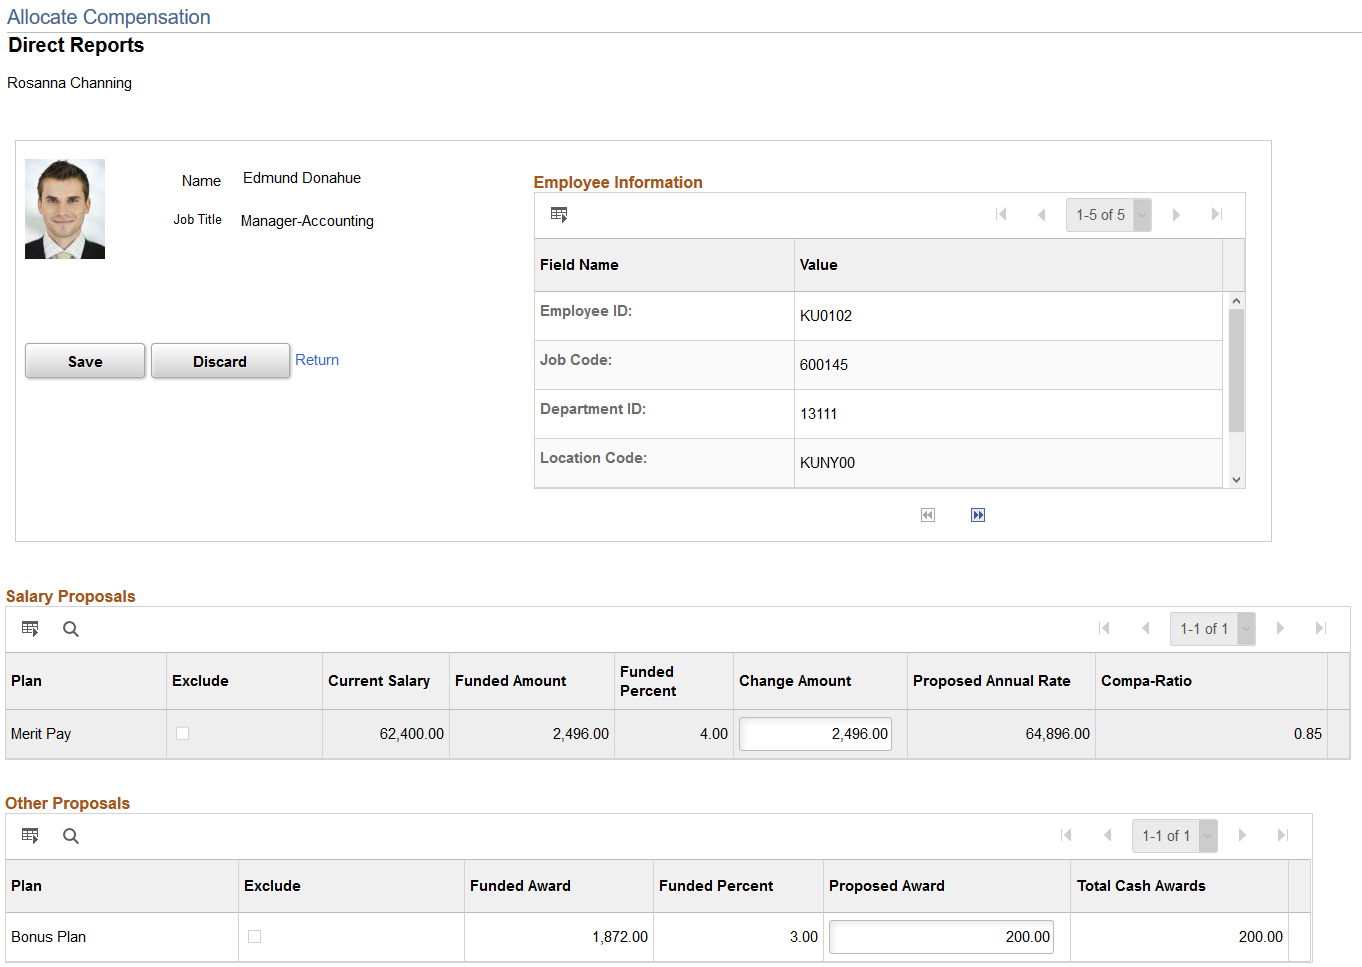 Allocate Compensation - Direct Reports page (1 of 2)